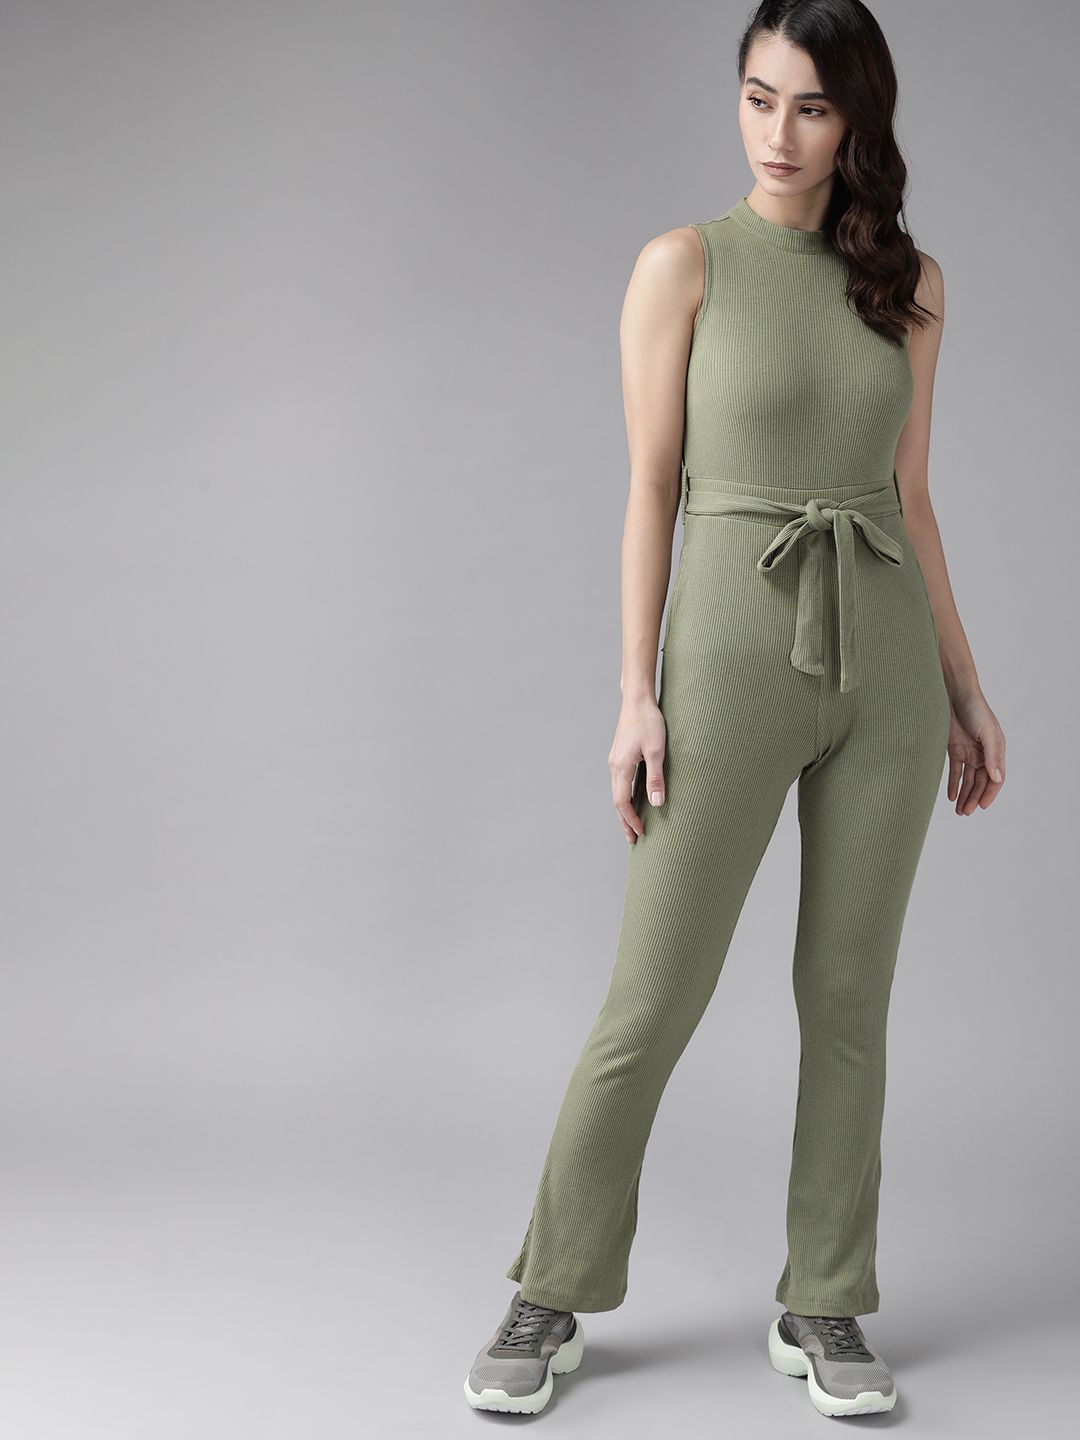 Roadster Olive Green Ribbed Basic Belted Jumpsuit Price in India